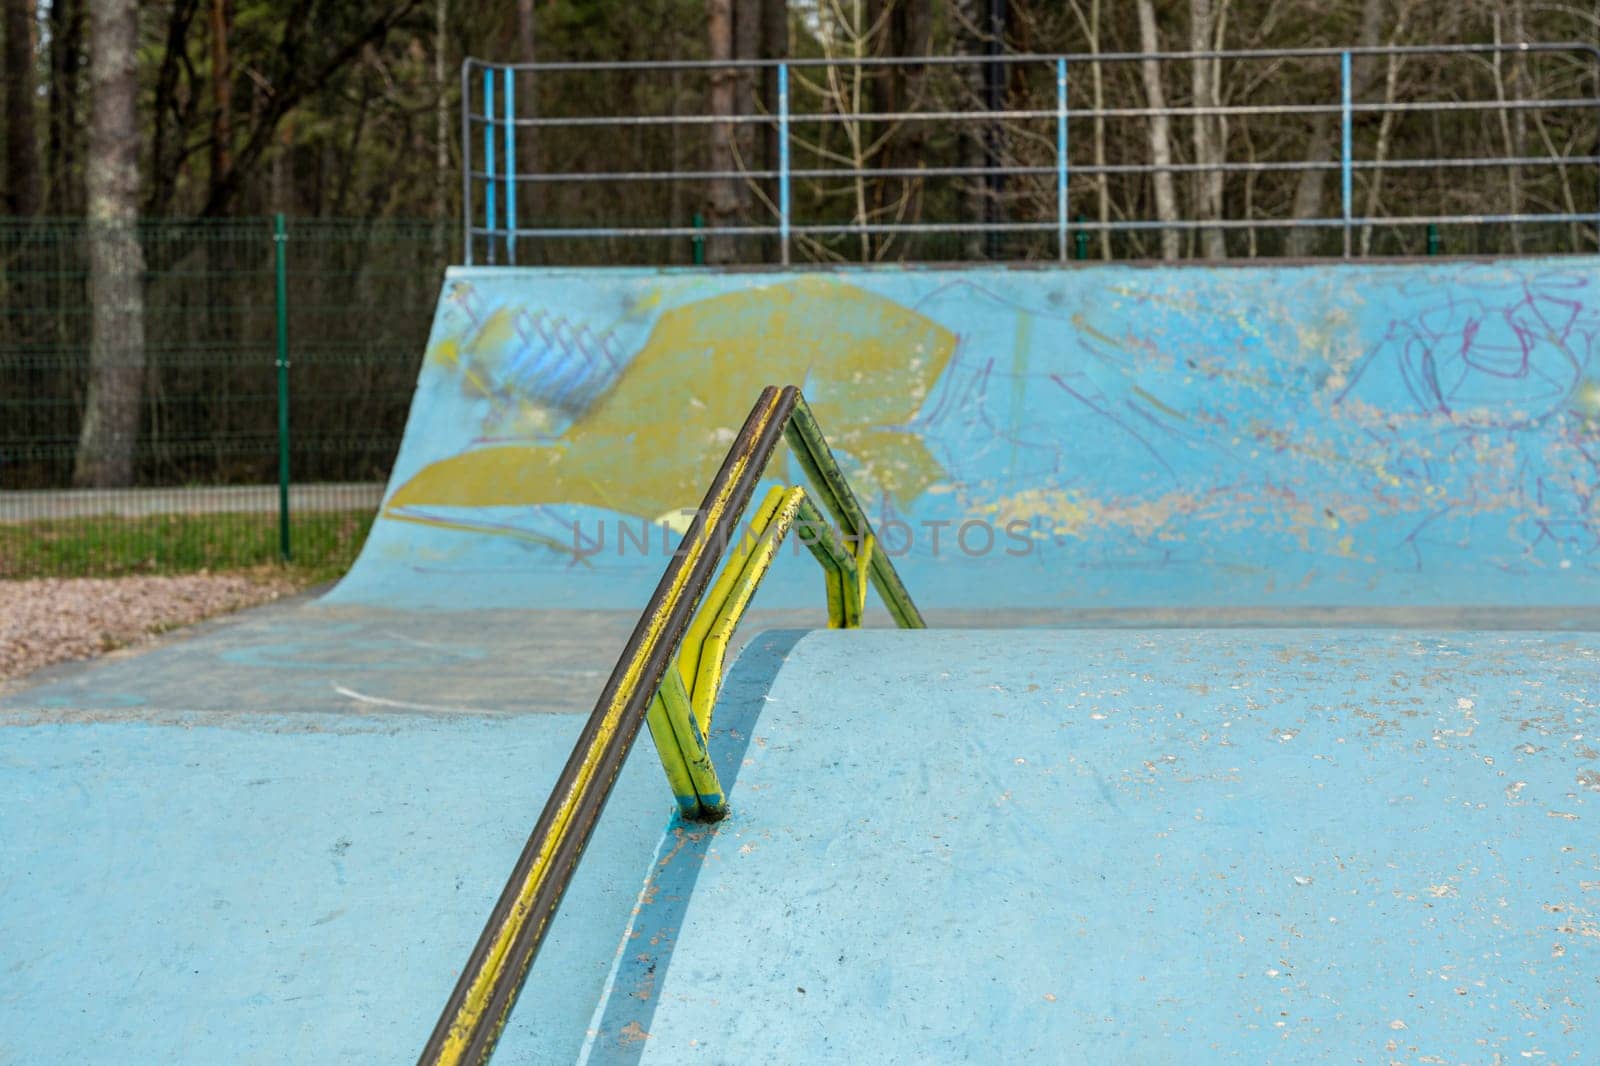 a ramp with an iron ramp for jumping in a skate park by audiznam2609